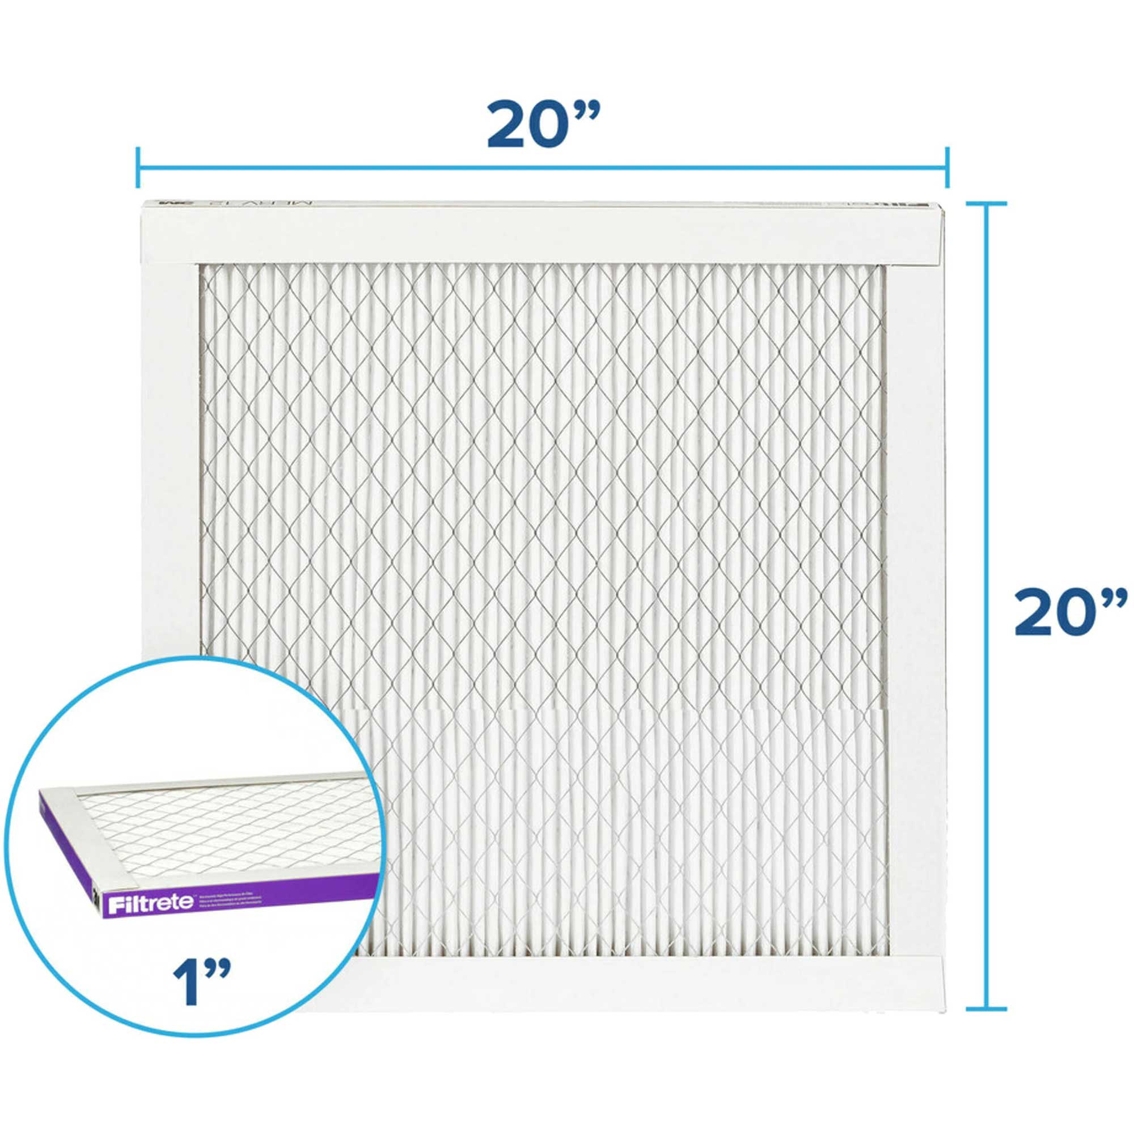 3M Filtrete Allergen Bacteria and Virus 1500 MPR 20 in. x 20 in. x 1 in. Air Filter - Image 2 of 8